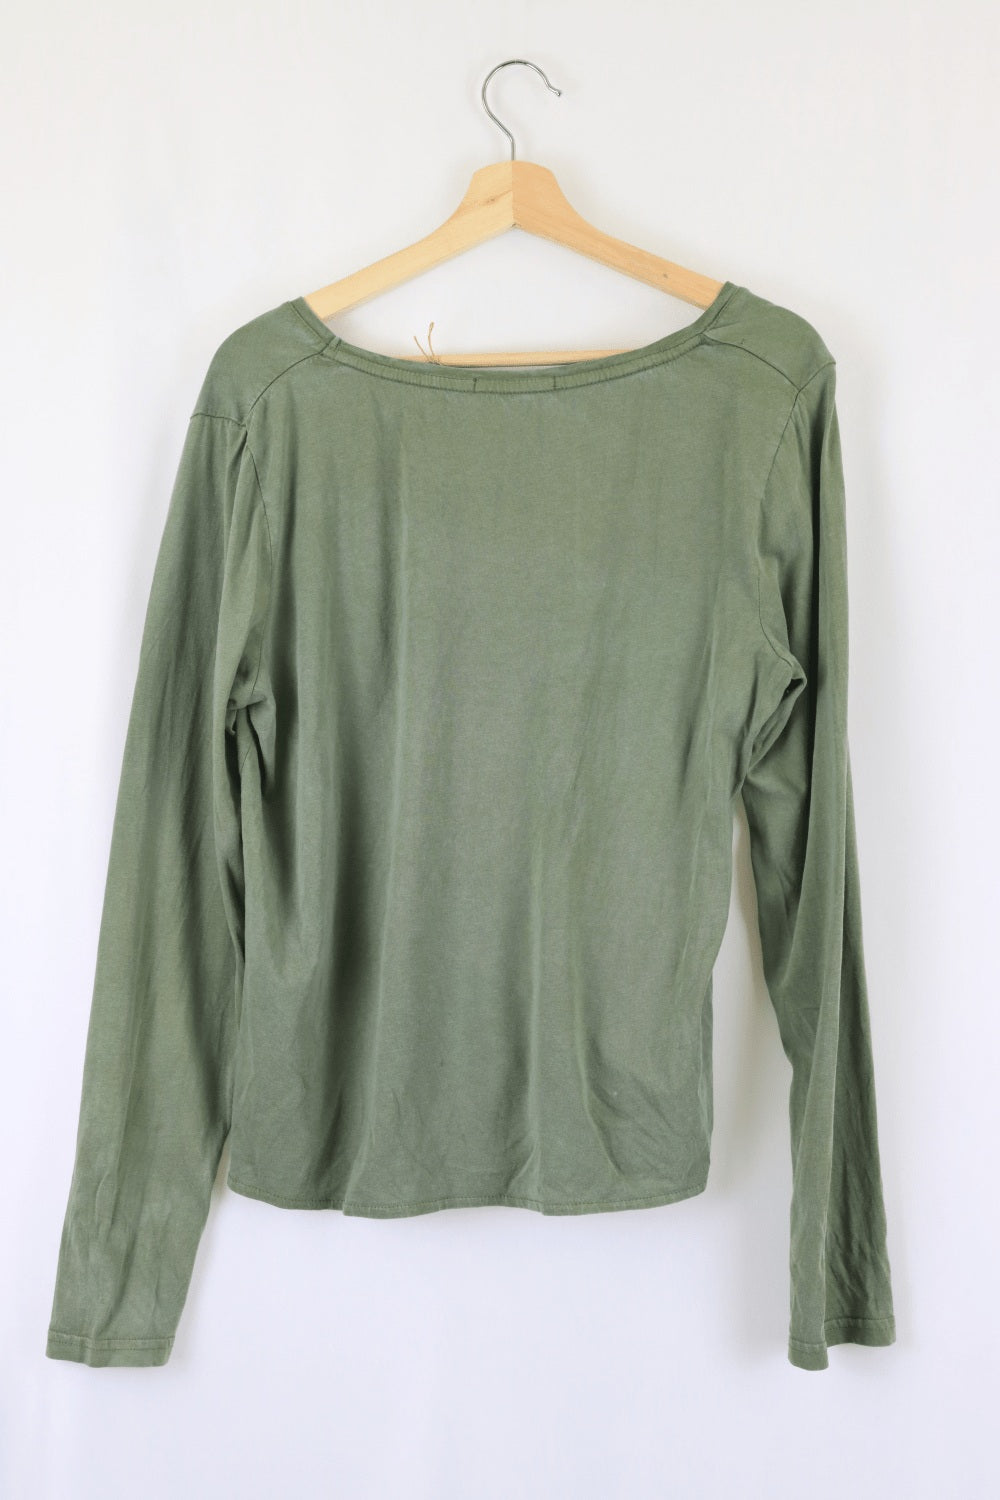 All About Eve Olive Longsleeve Top 10